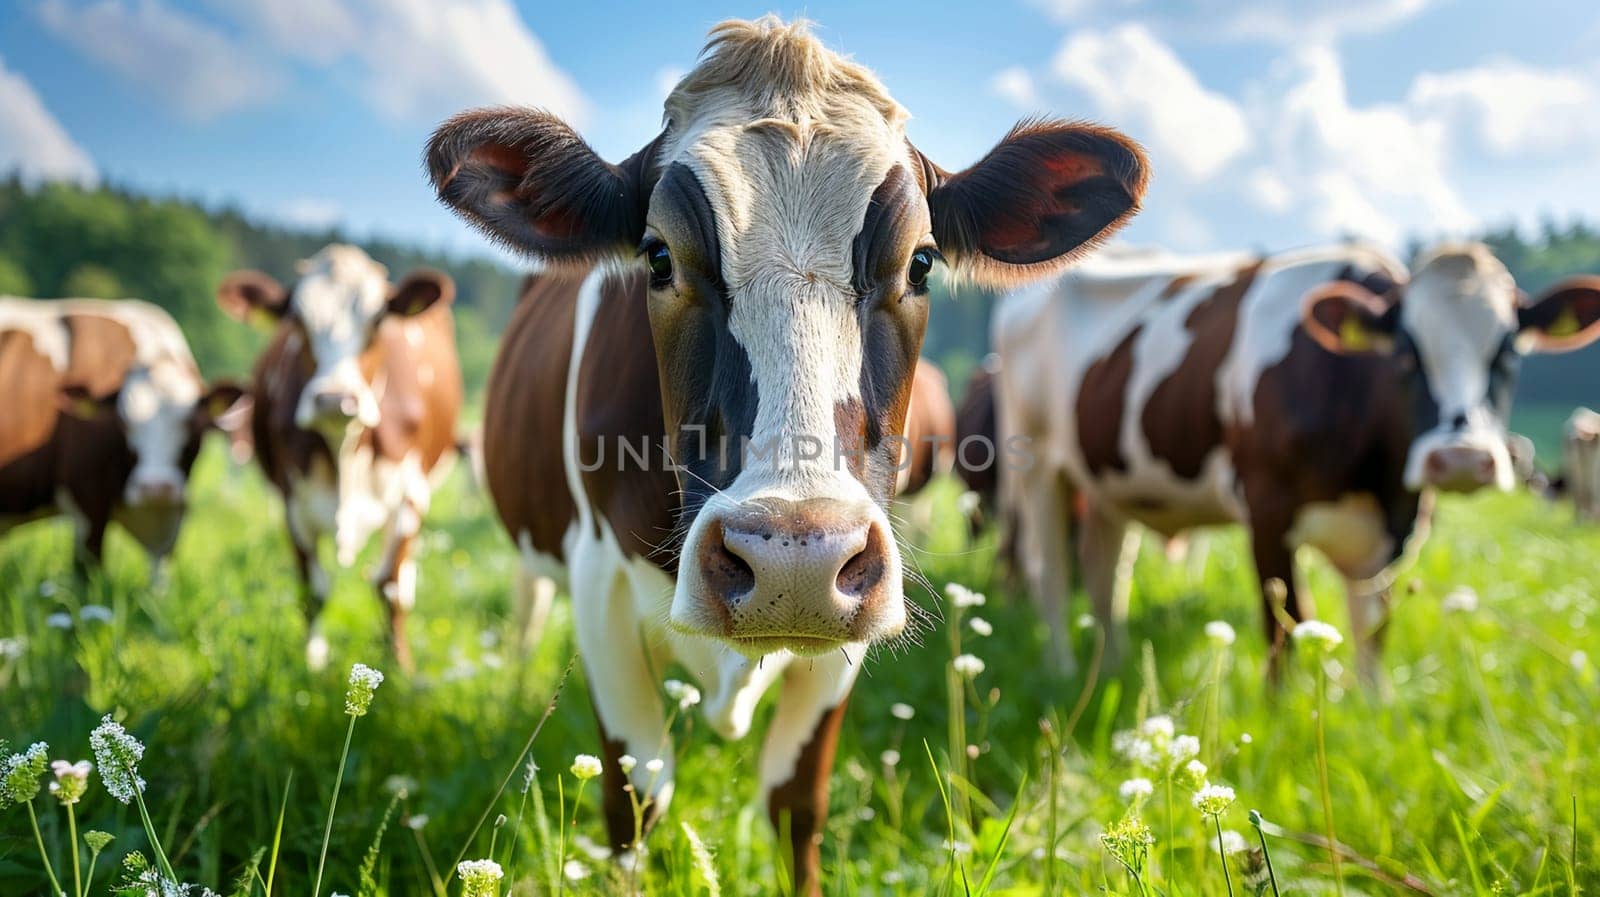 Herd of cows enjoying fresh grass in a sunny meadow, showcasing dairy farming, agriculture, and rural life under blue skies.